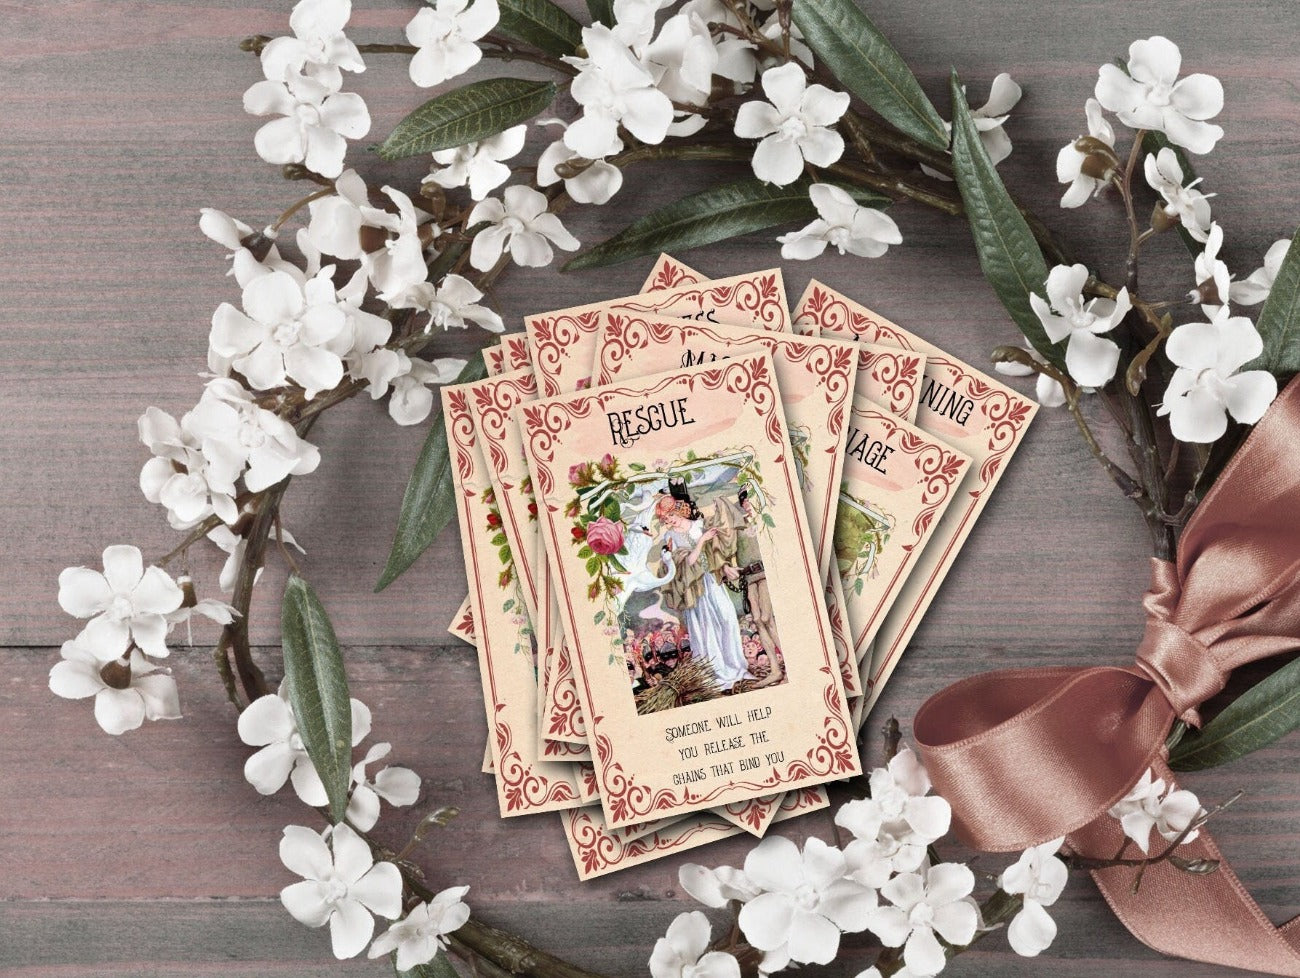 20 Beltane Faery Oracle Cards with rose banners, assorted vintage fairy pictures and ornate borders.